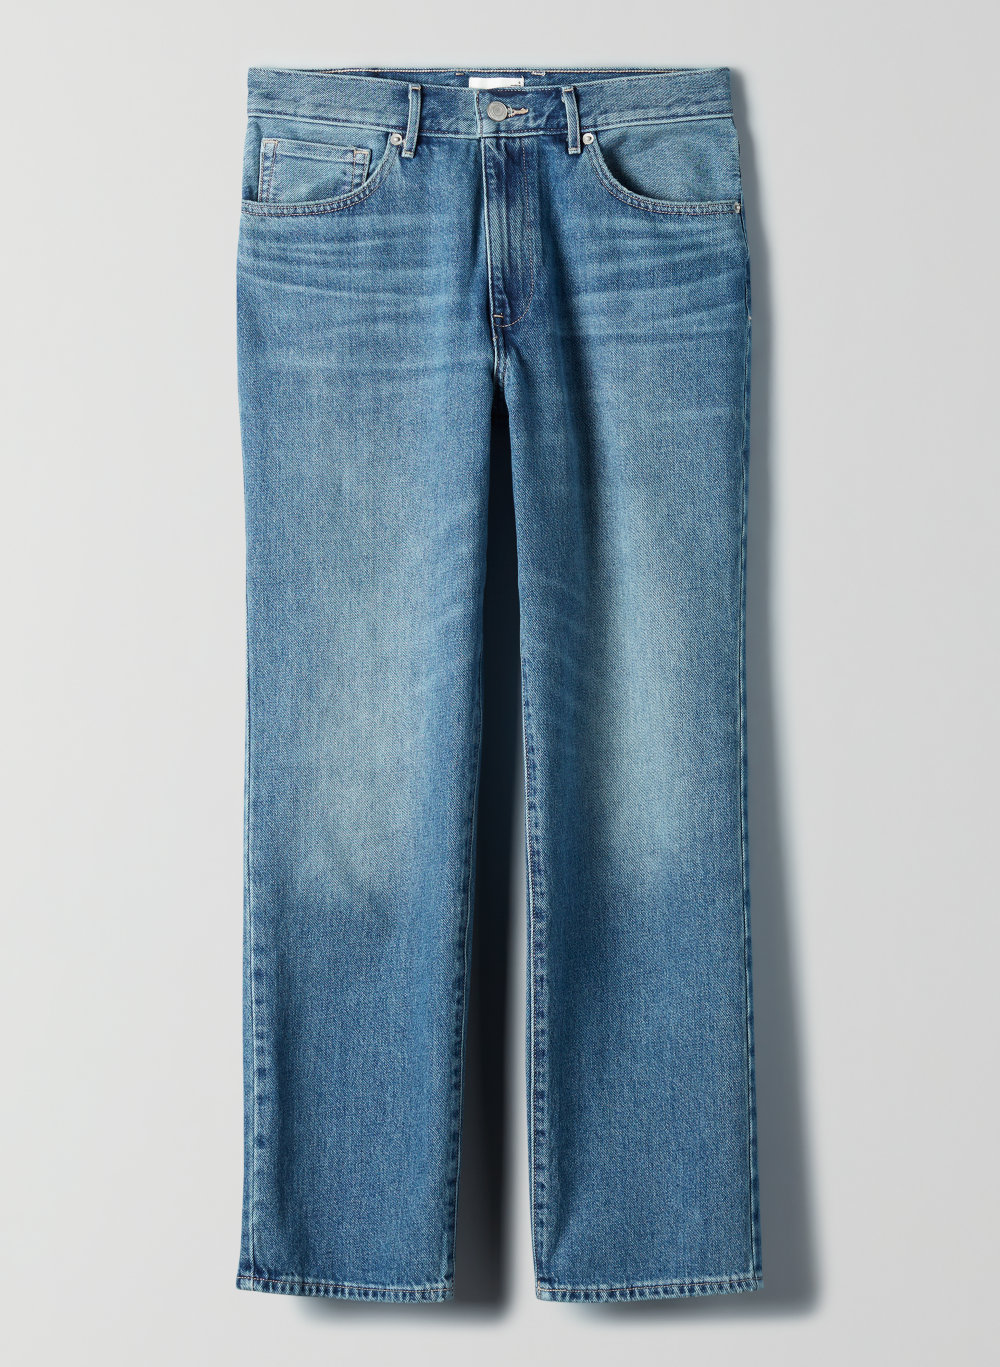 wilfred free jeans